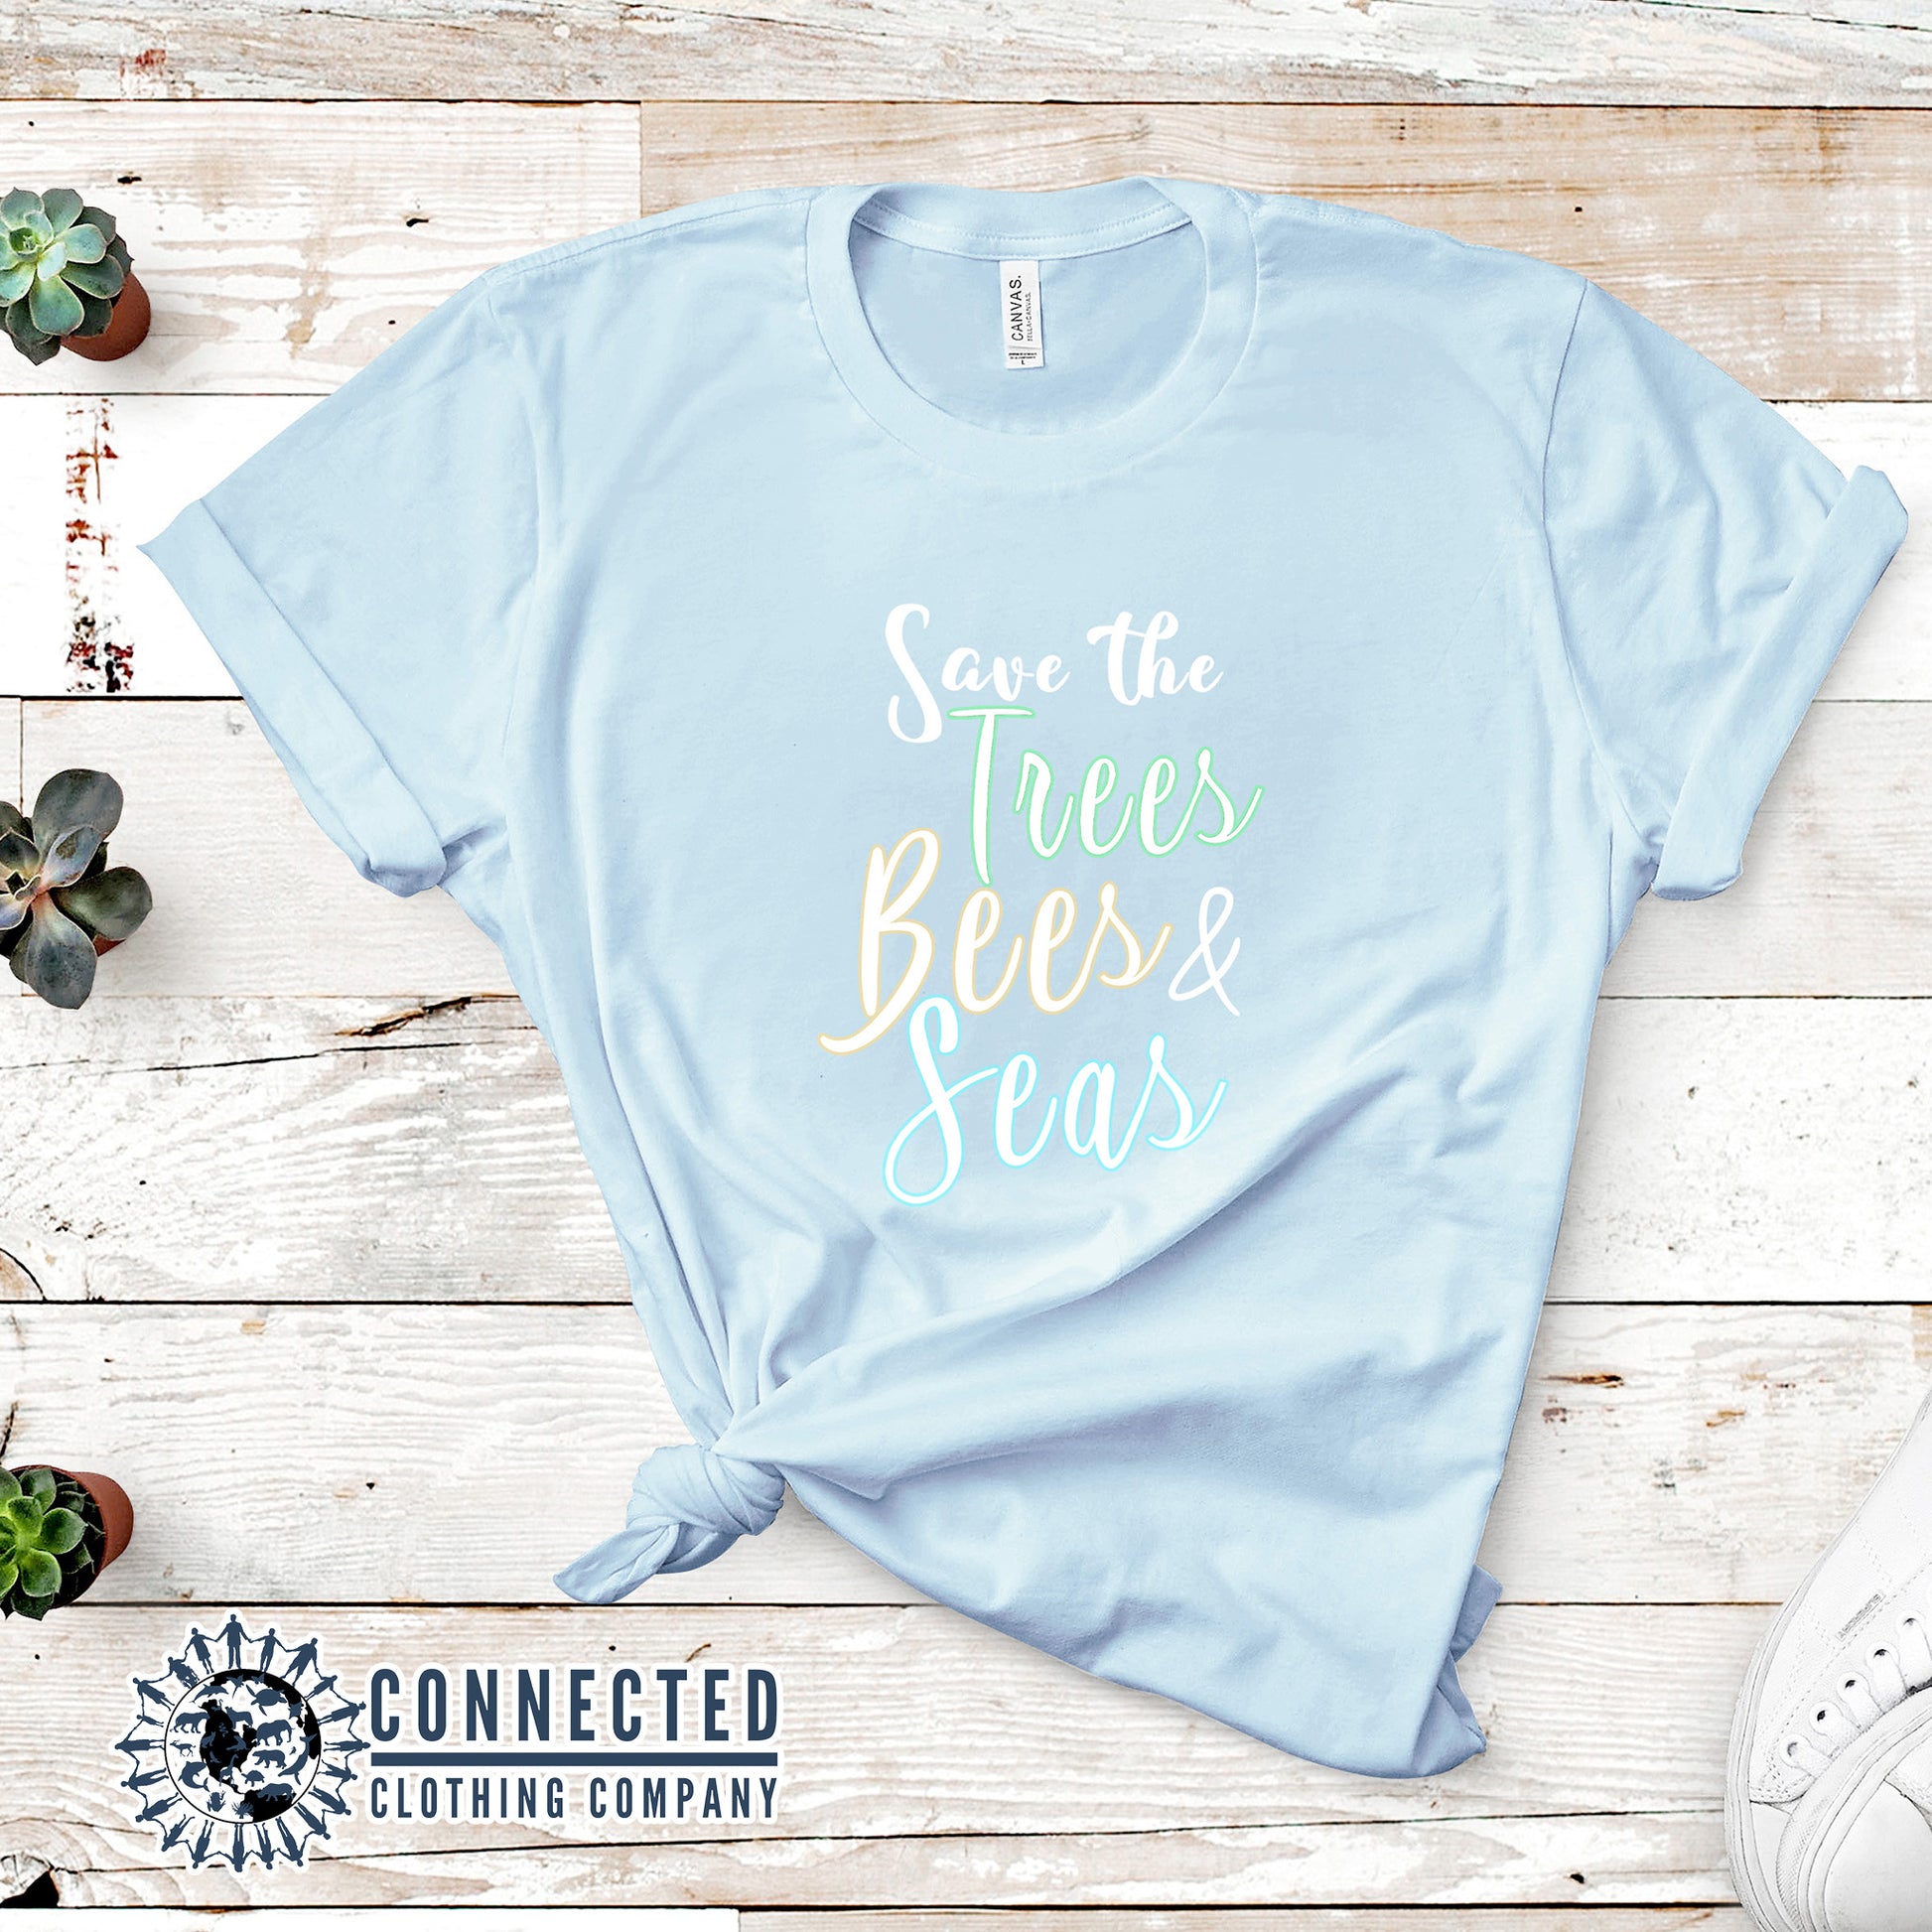 Light Blue Save The Trees Bees & Seas Short-Sleeve Tee - Connected Clothing Company - Ethically and Sustainably Made - 10% donated to ocean conservation